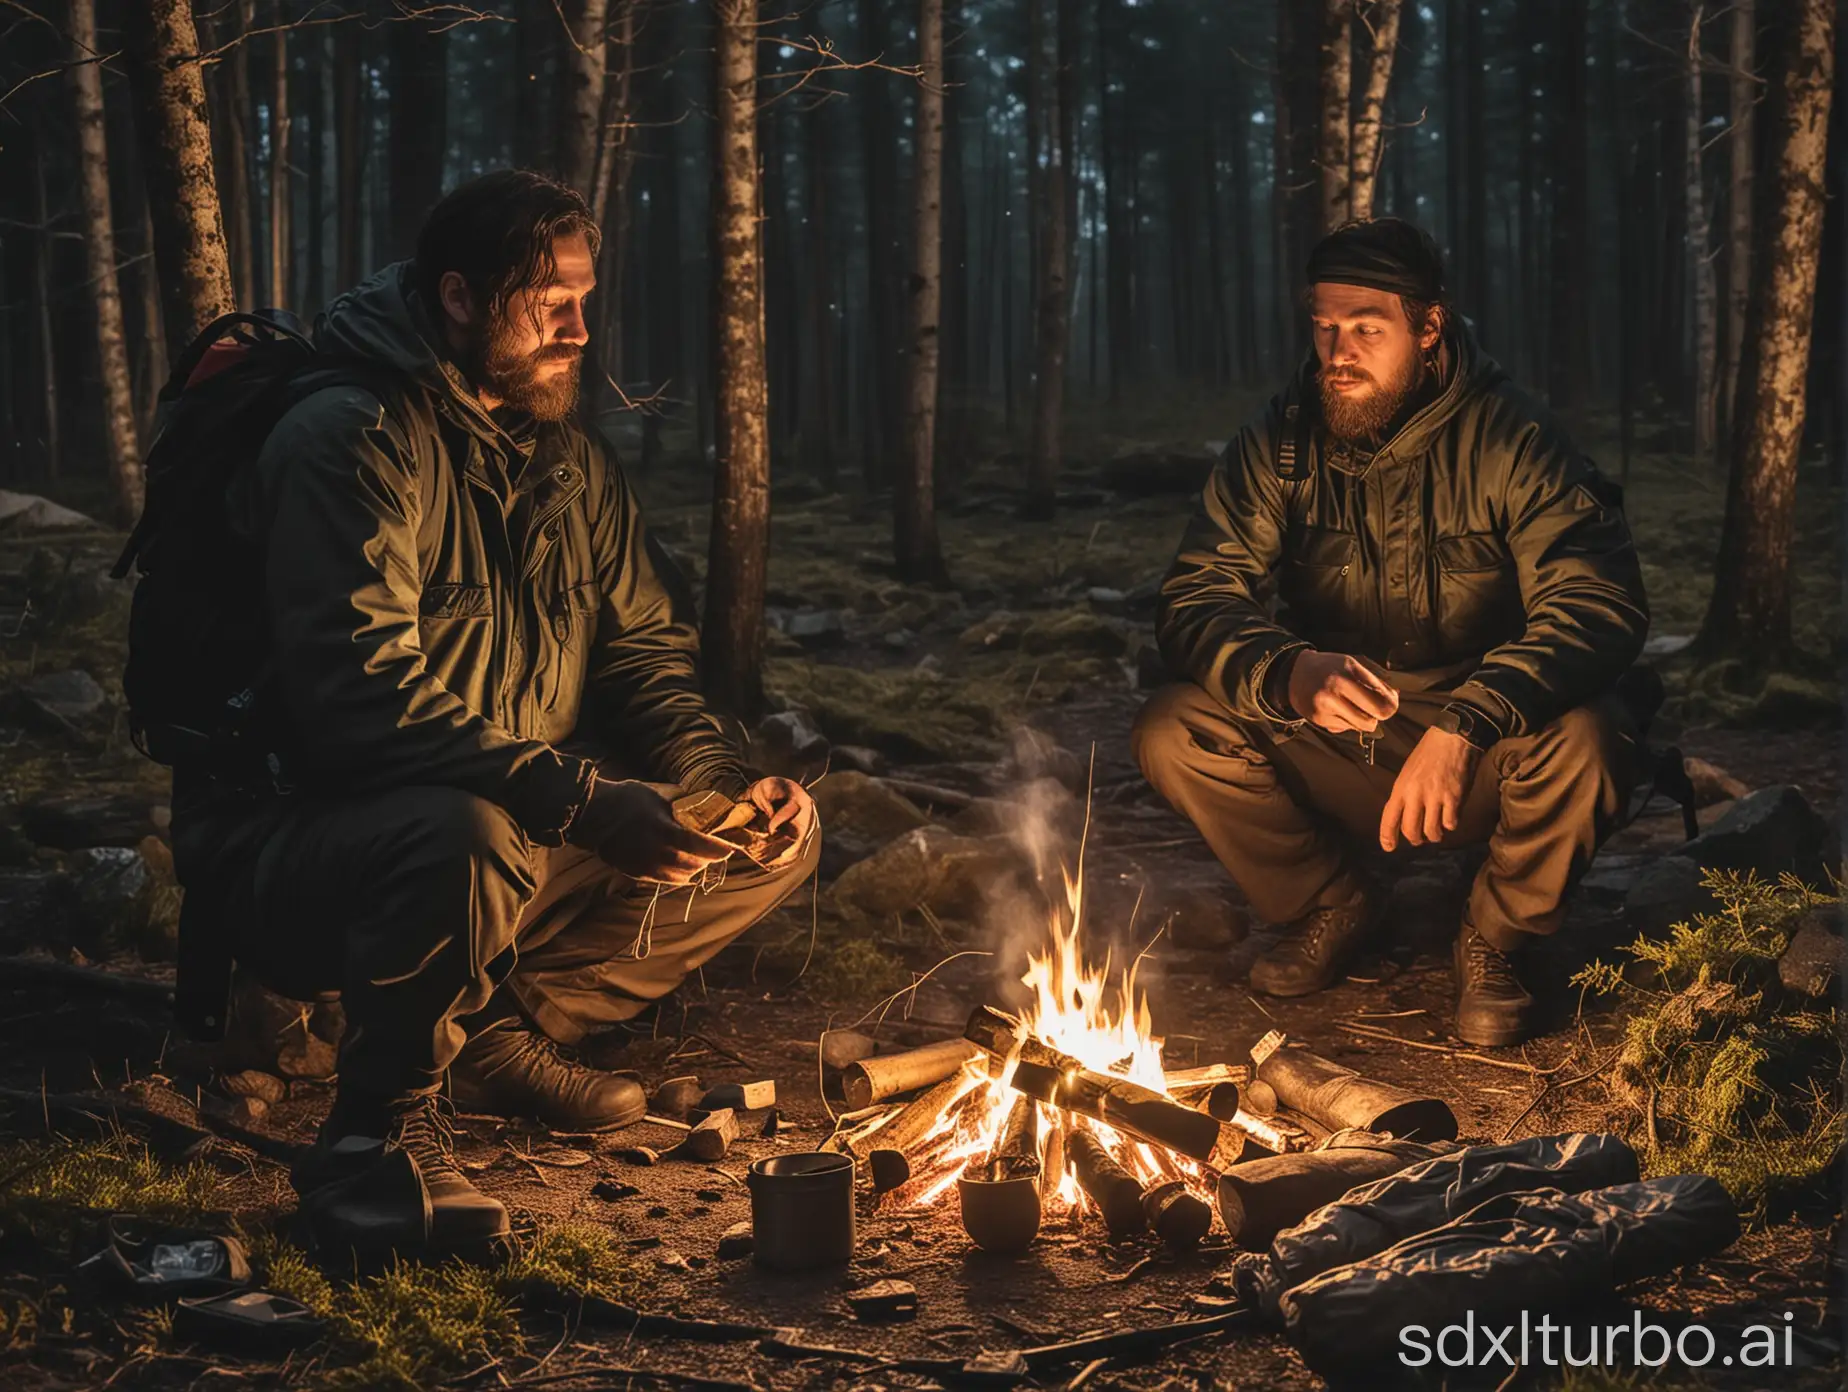 Night-Camping-Survival-Preppers-in-Forest-with-Fire-and-Gear